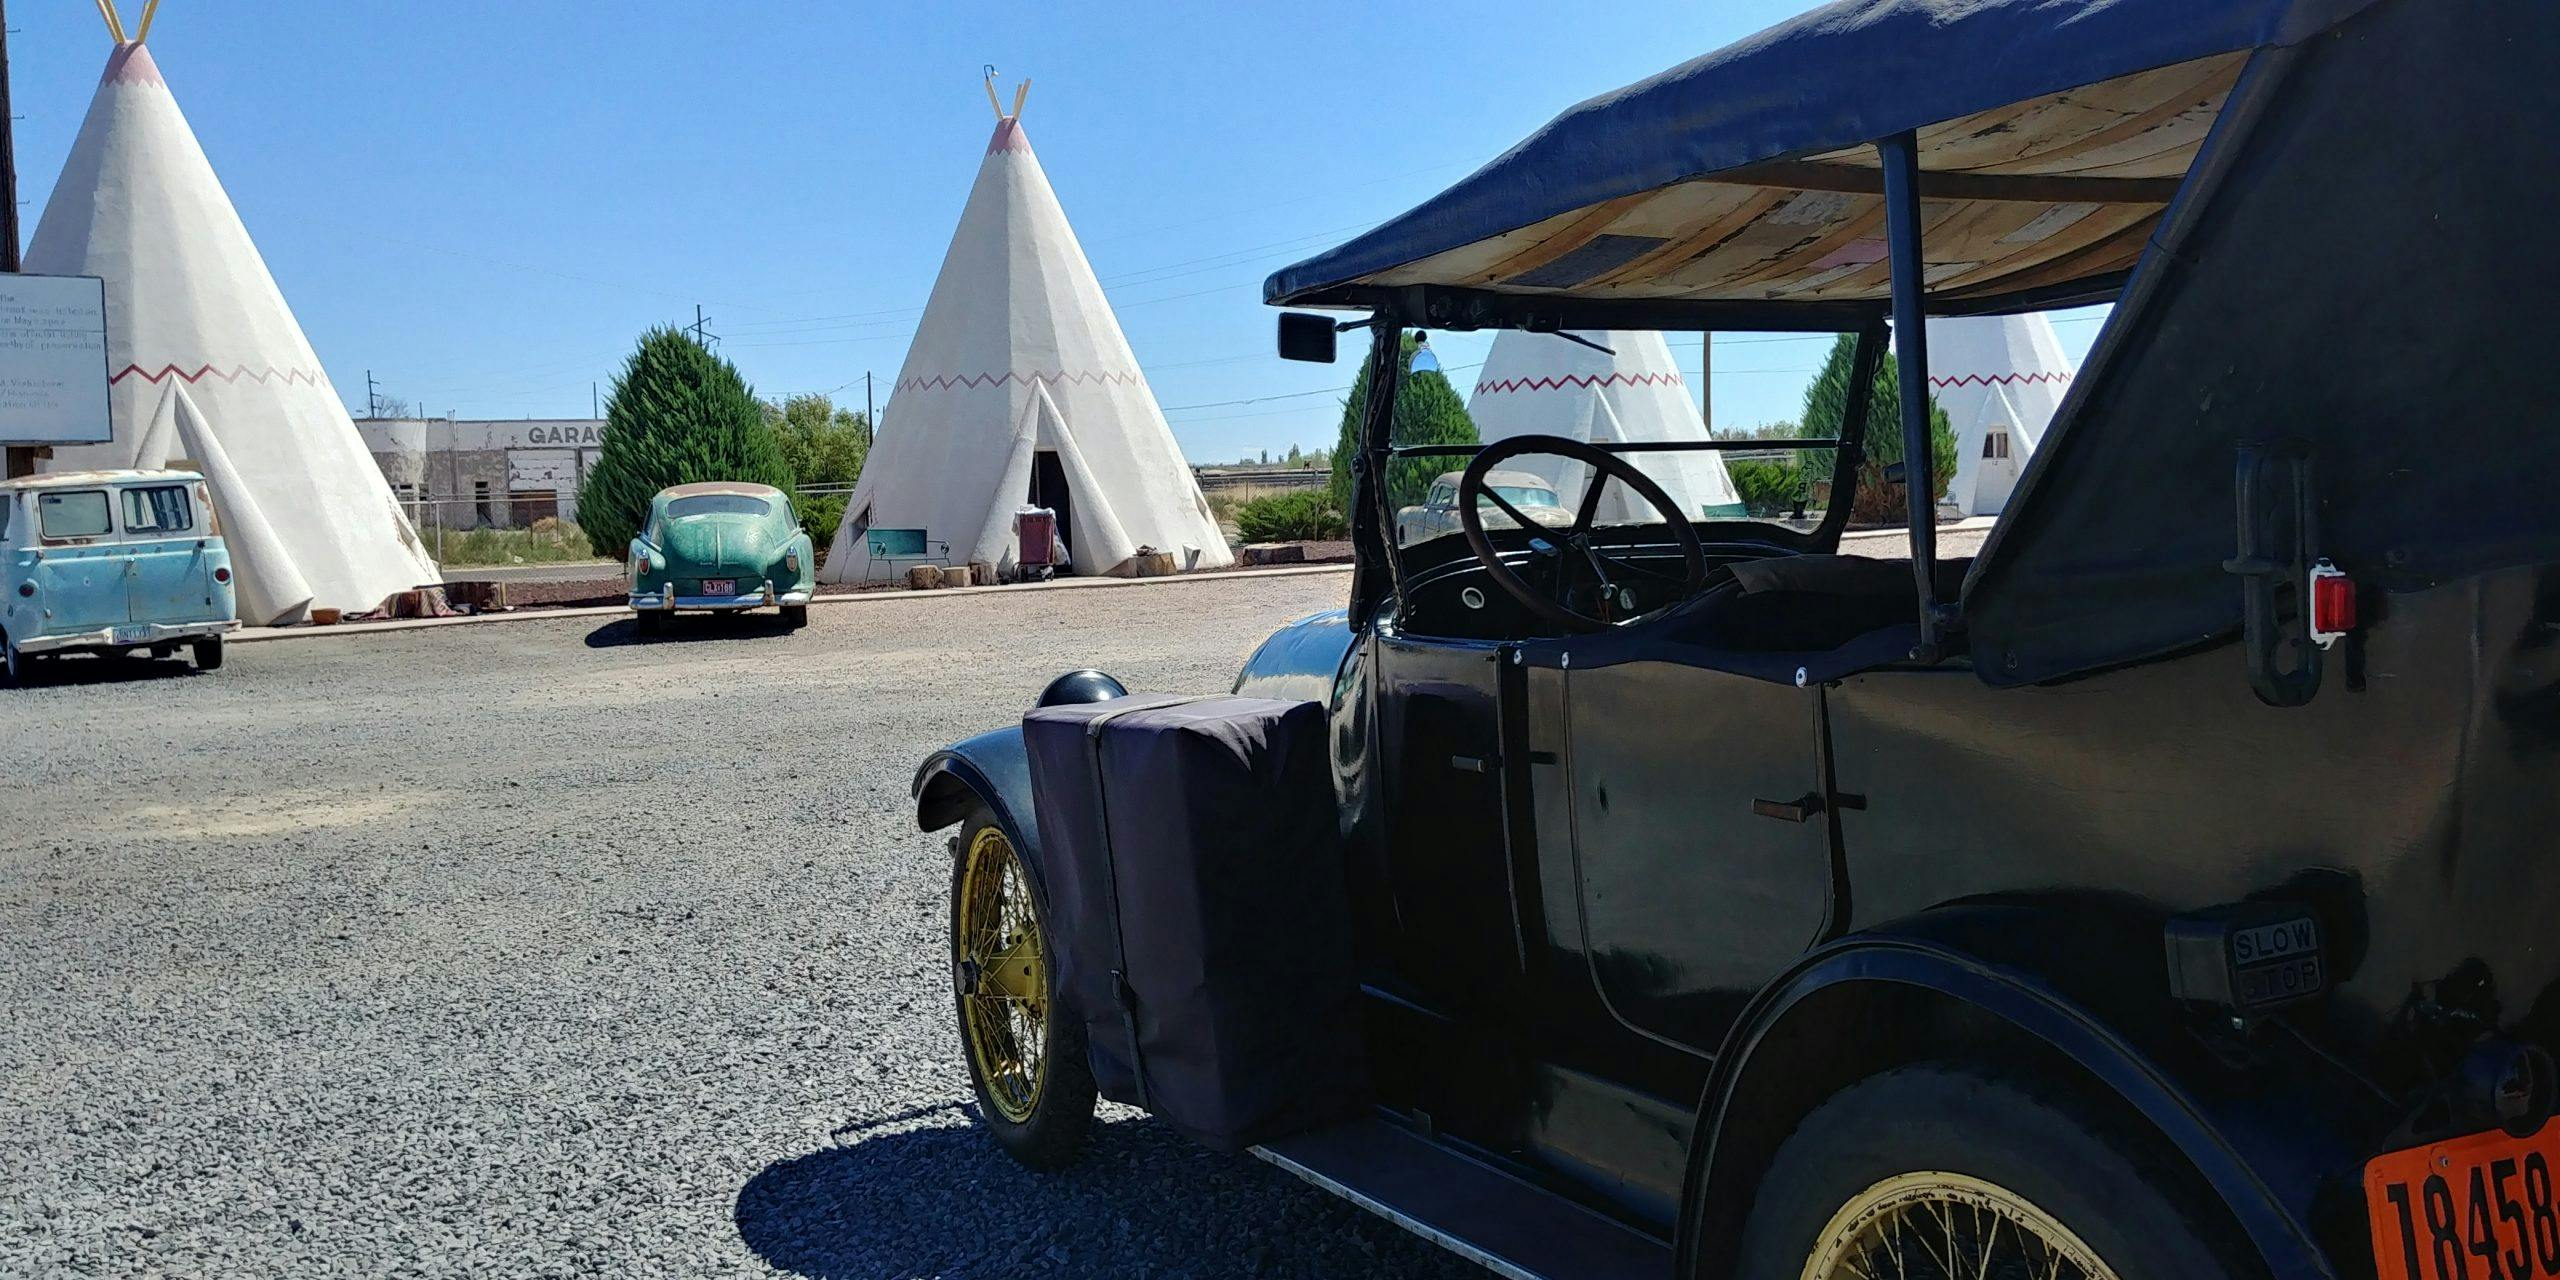 1919 Franklin teepees route 66